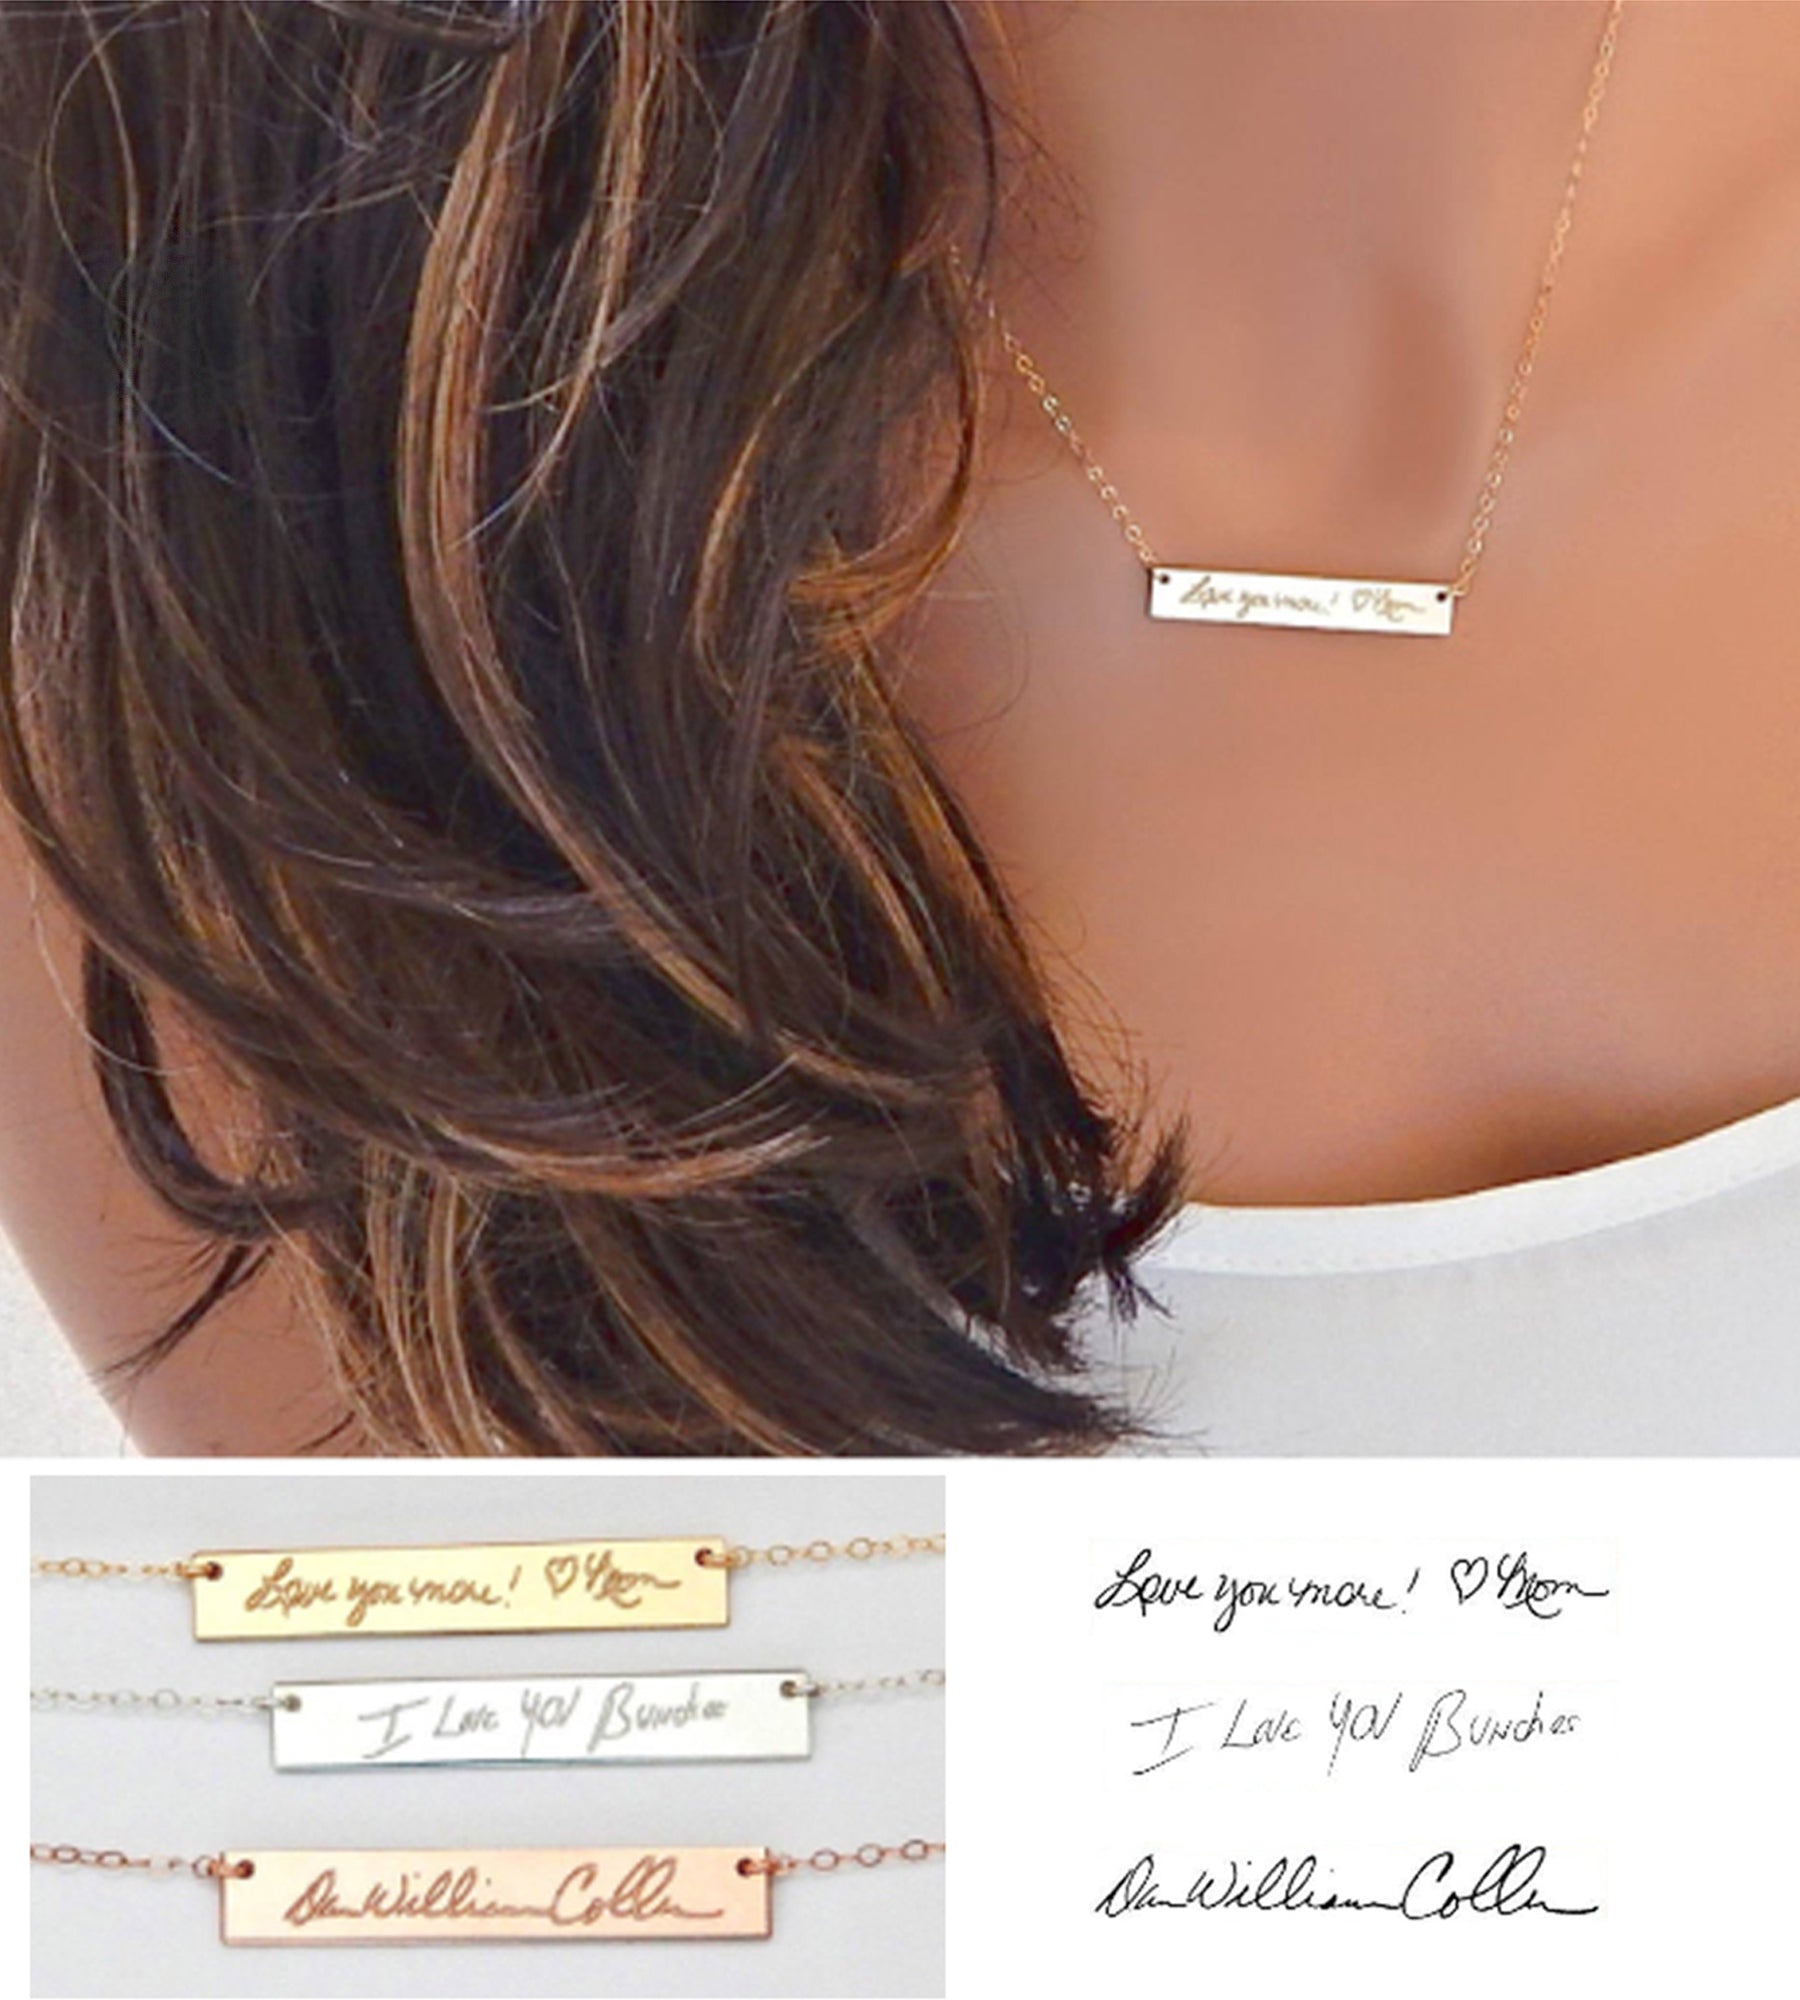 Mannequin is wearing a shiny gold filled necklace with a custom message engraved on a bar. Below the mannequin is an image of three different metal finishes offered by custom jeweler Gilded Sapphire and each color metal bar has engraved a distinct handwritten message. 